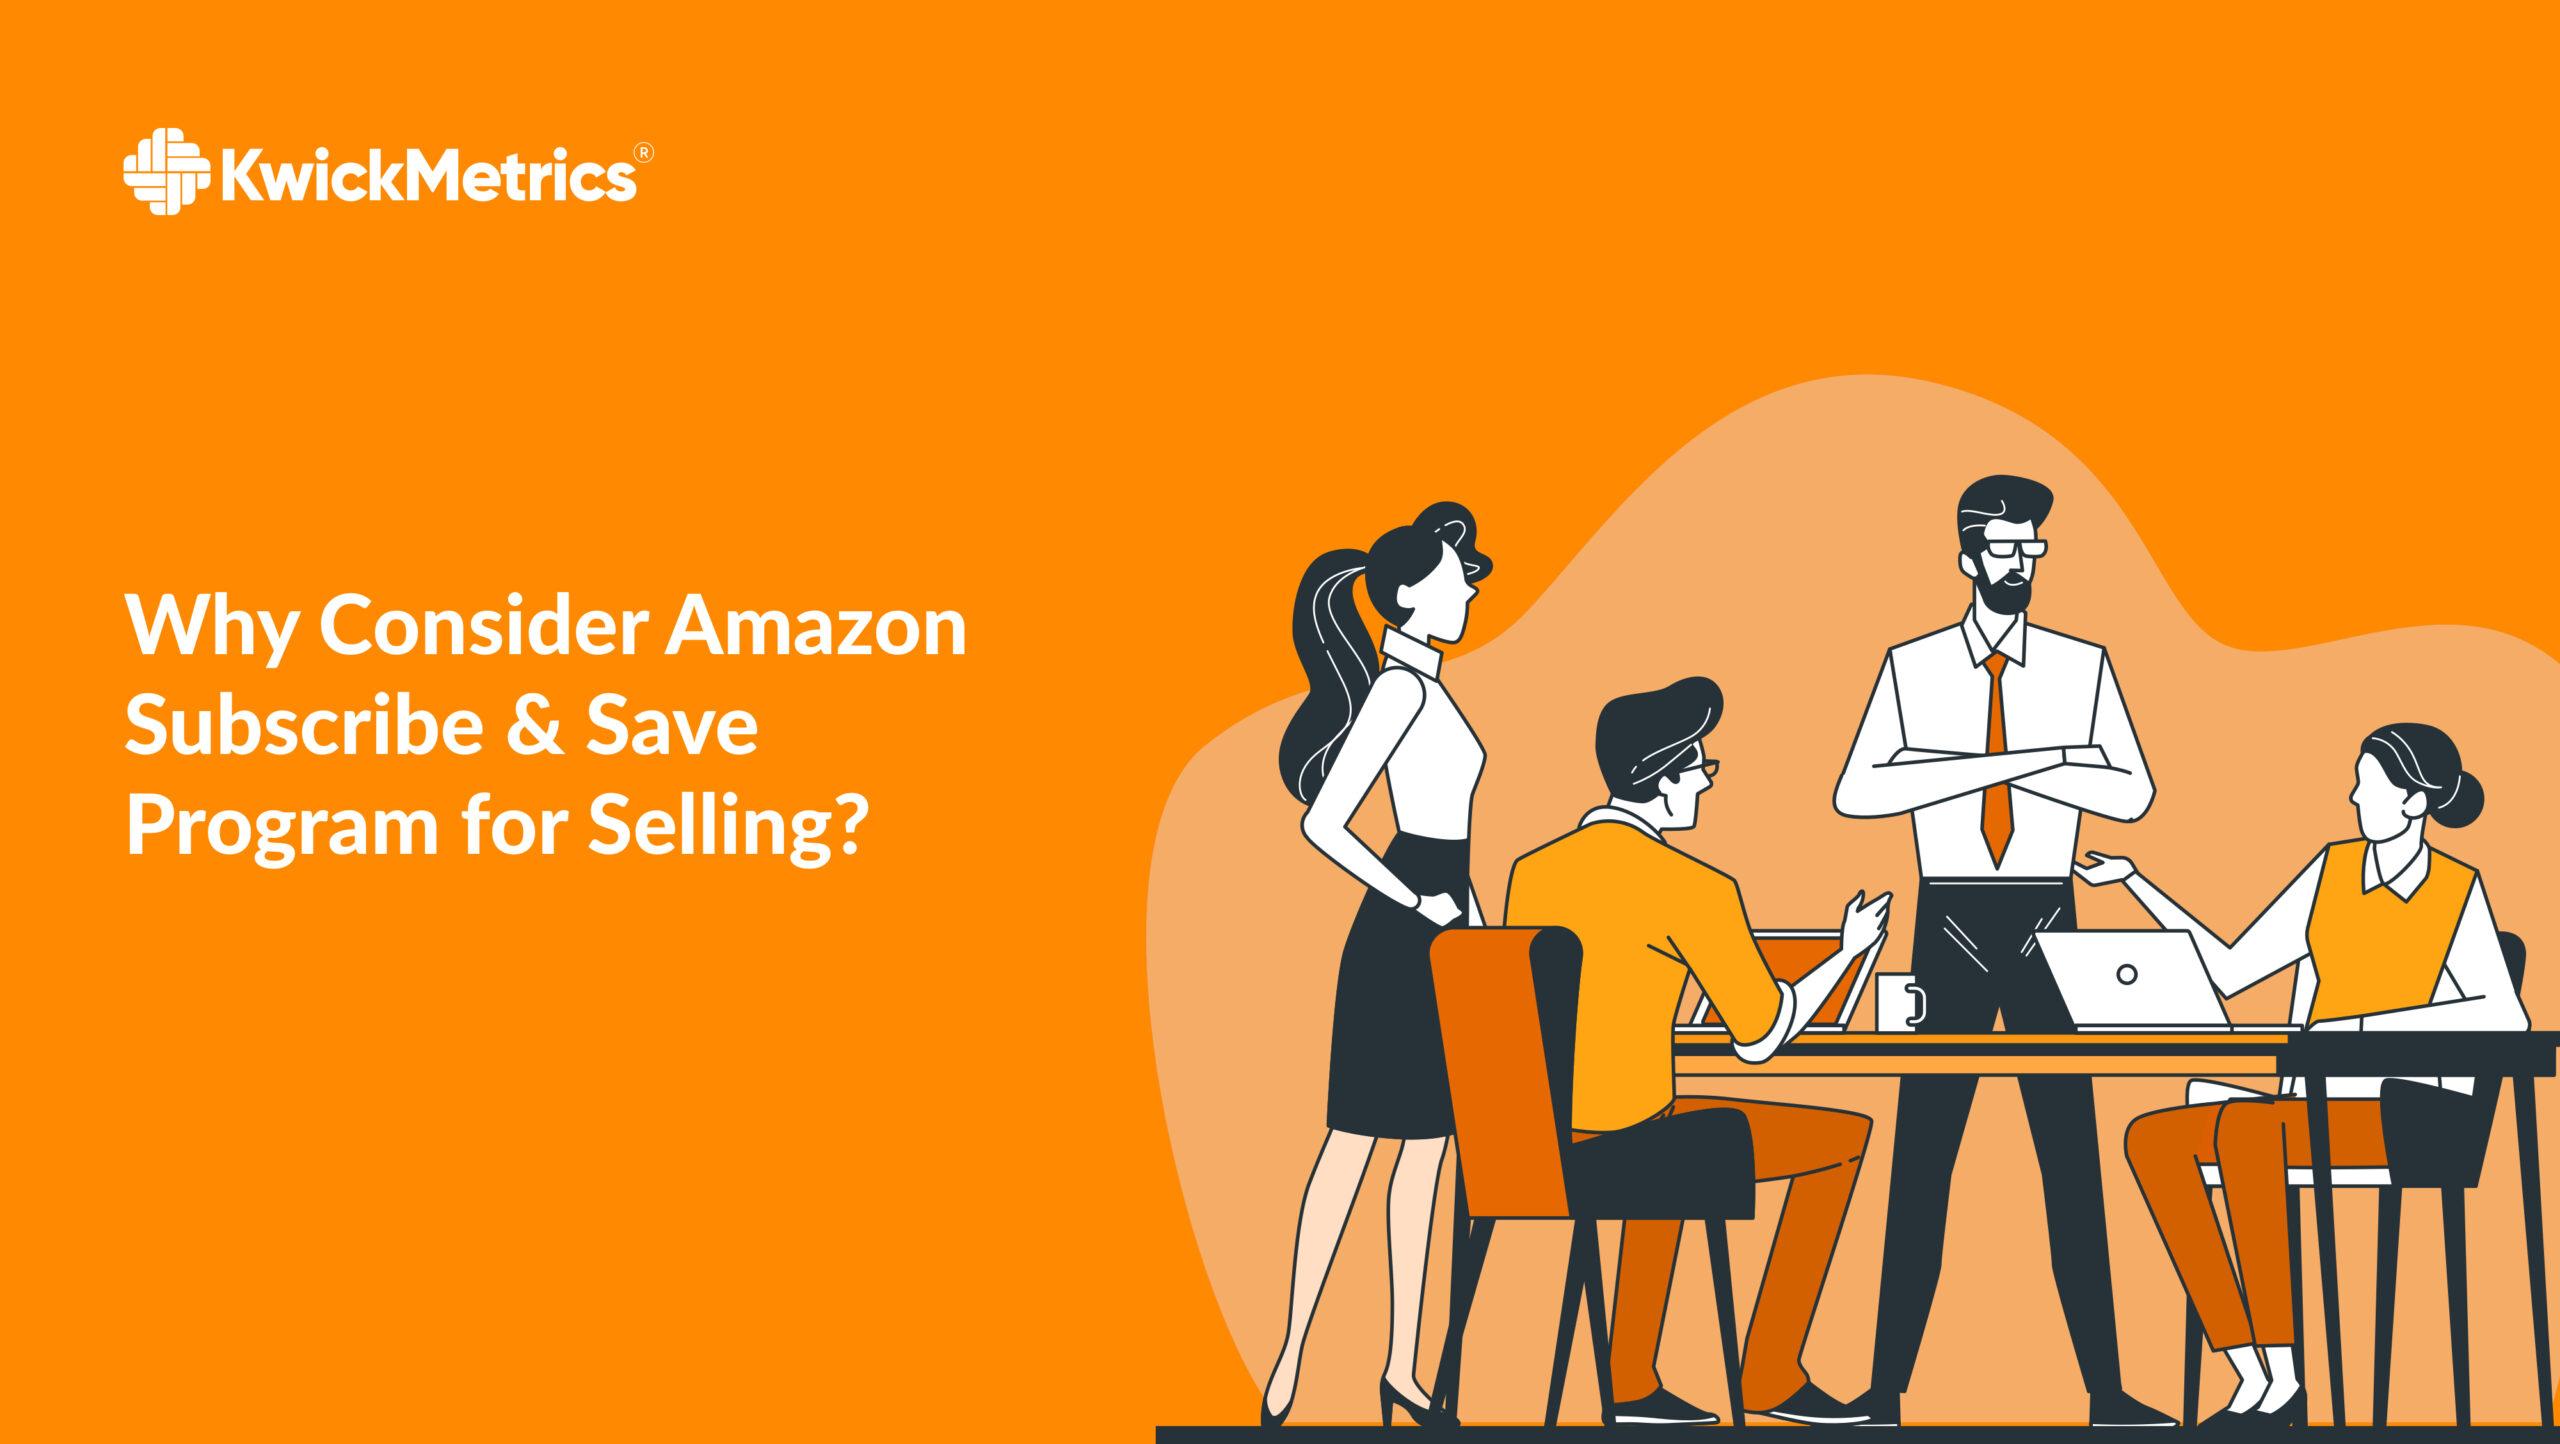 Why Consider Amazon Subscribe & Save Program for Selling?